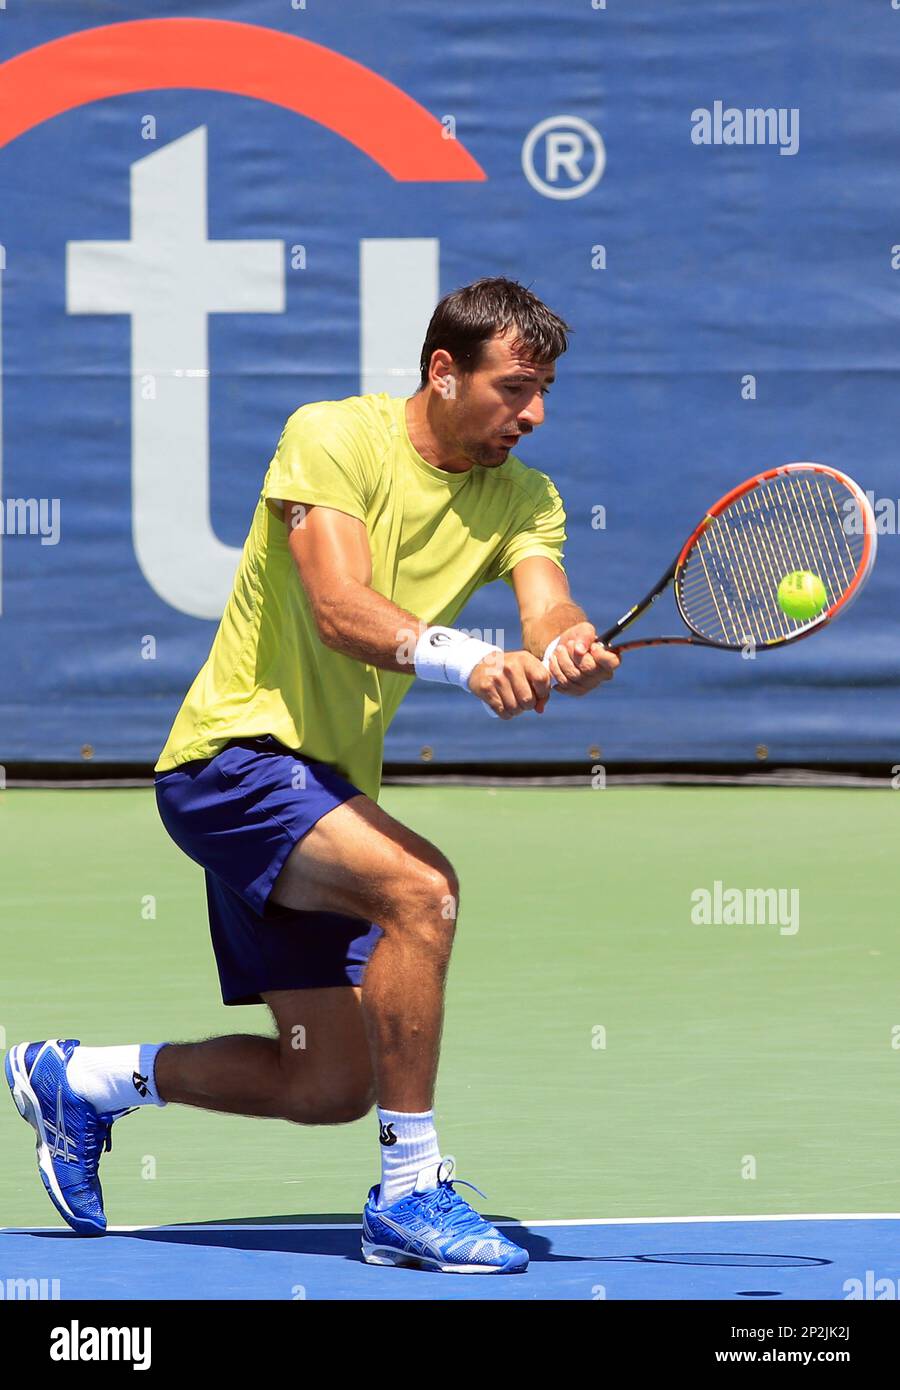 August 08 2015 Ivan Dodig (CRO) during a ATP mens doubles semi-final match against Marcin Matkowski (POL) and Nenad Zimonjic (SRB) at the CITI Open tennis tournament at the Rock Creek tennis